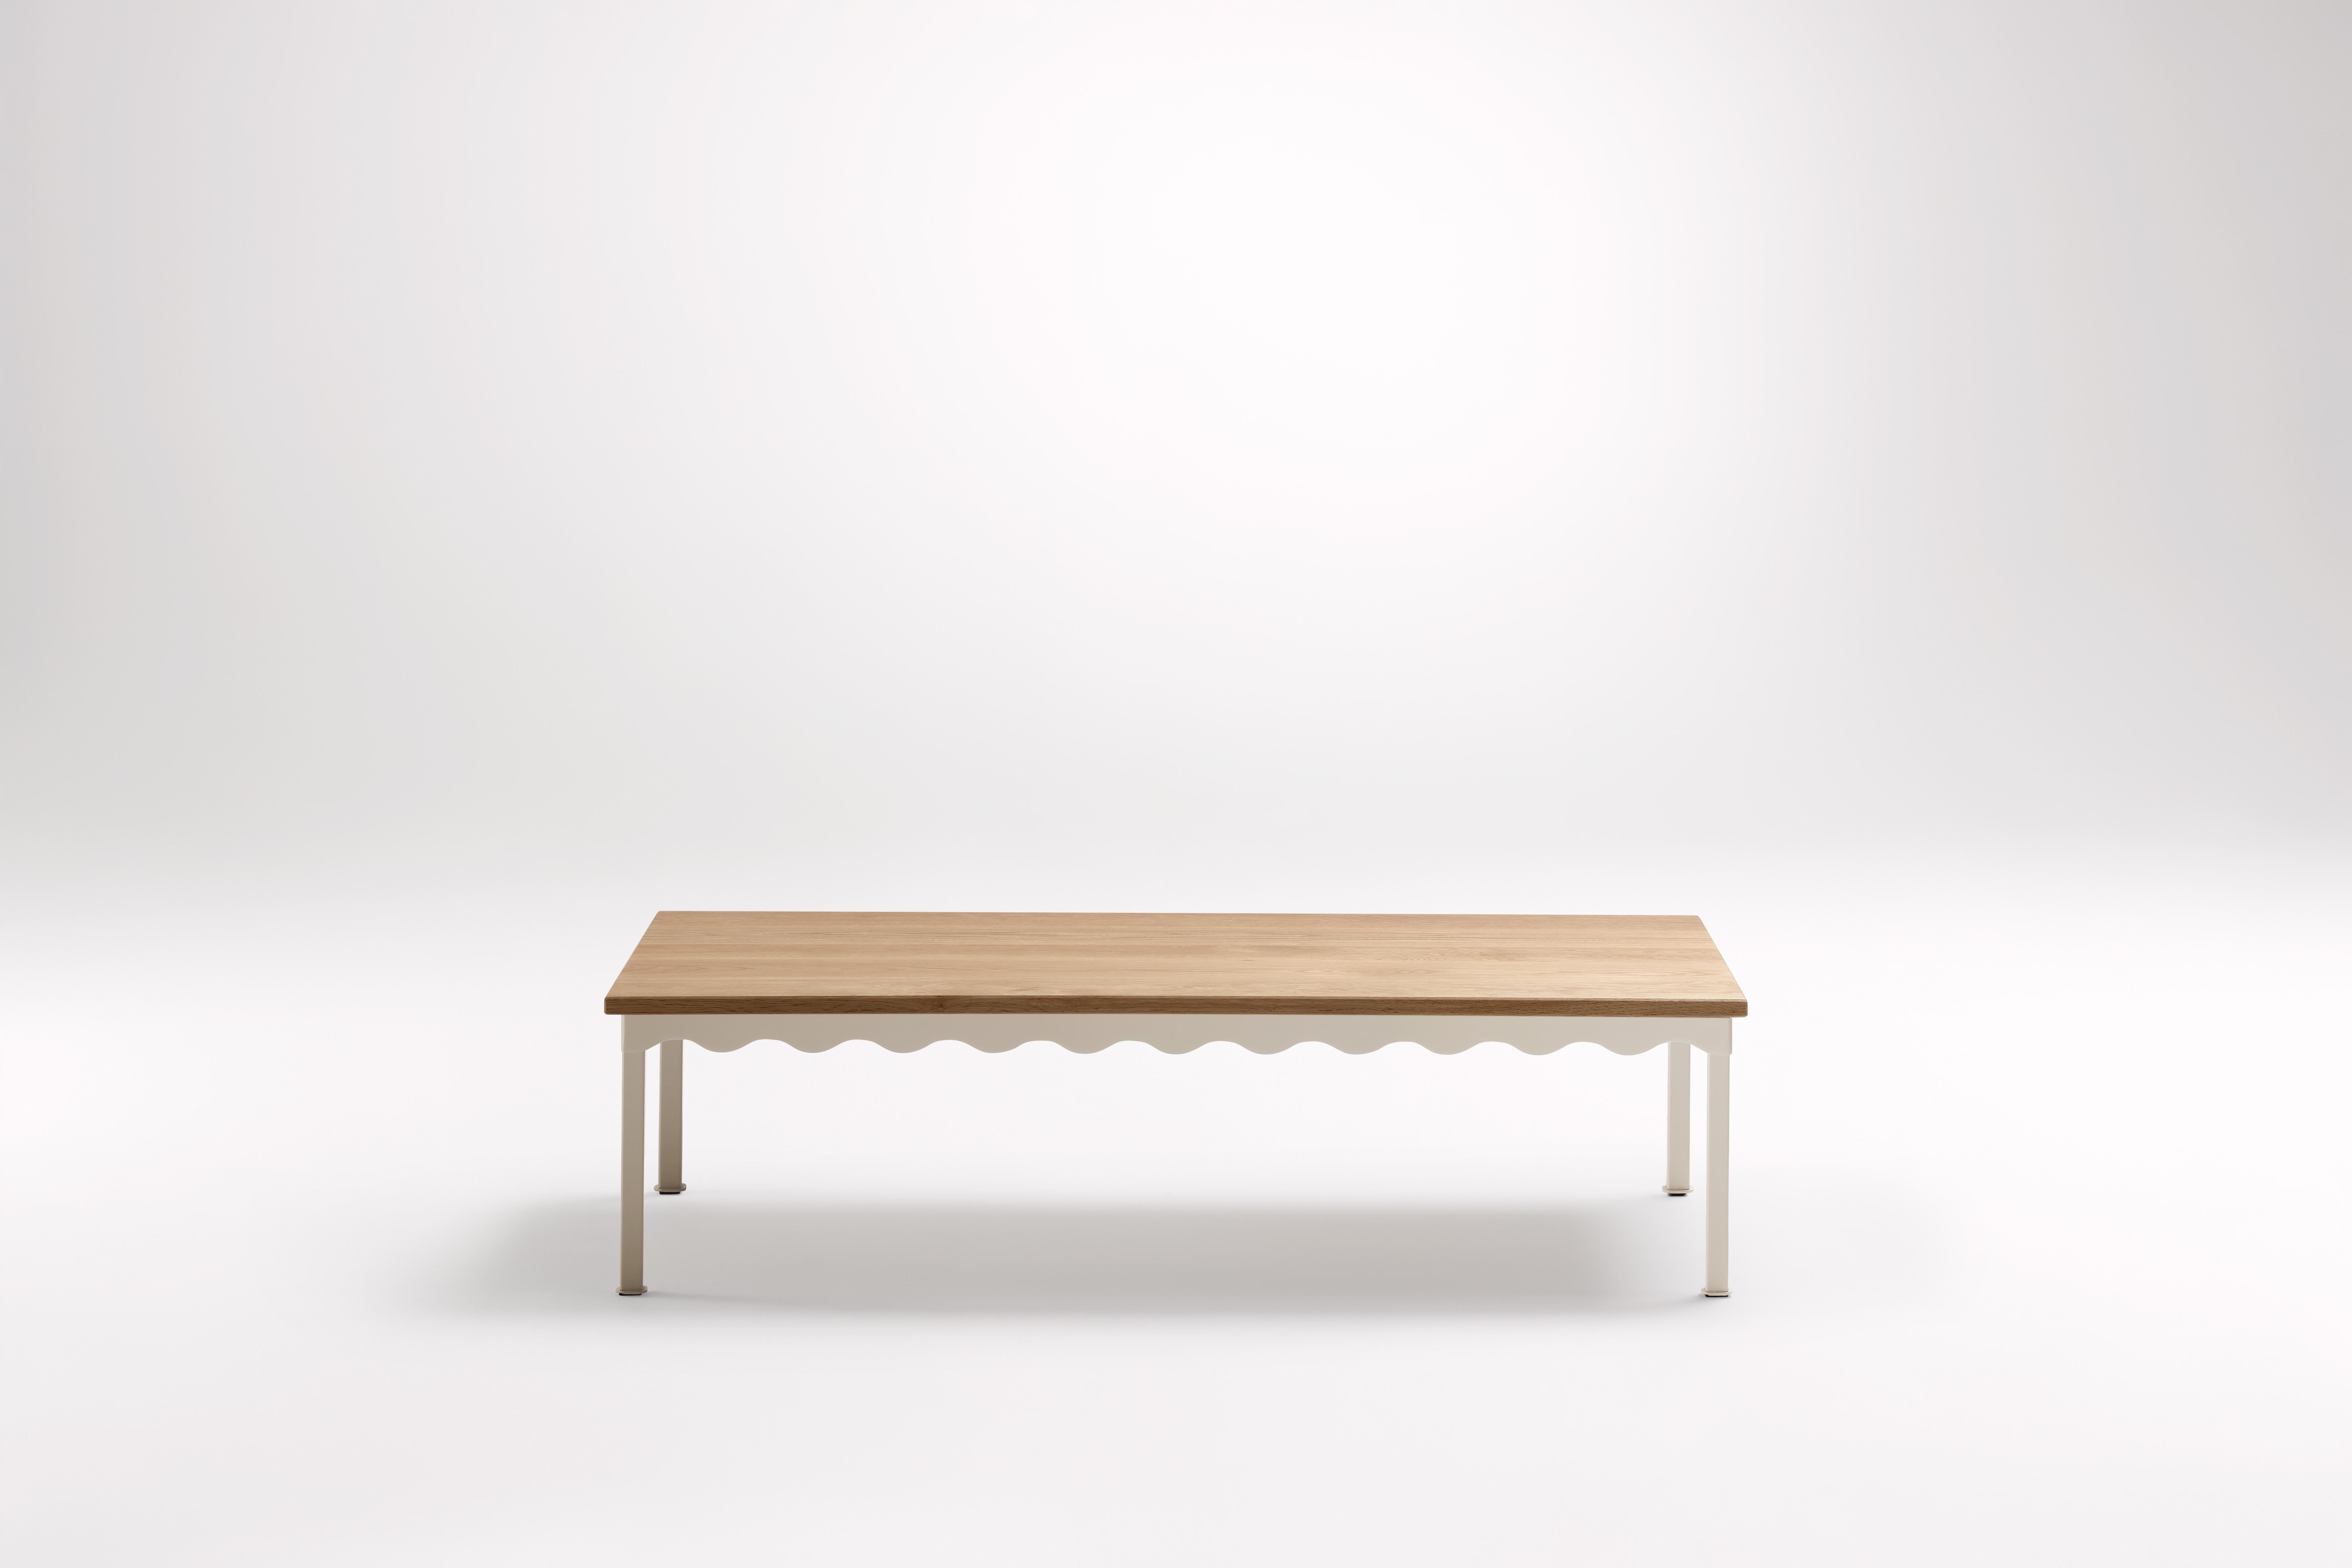 American Oak Bellini Coffee Table by Coco Flip
Dimensions: D 126 x W 66 x H 32 cm
Materials: Timber / Stone tops, Powder-coated steel frame. 
Weight: 20kg
Frame Finishes: Textura Paperbark.

Coco Flip is a Melbourne based furniture and lighting